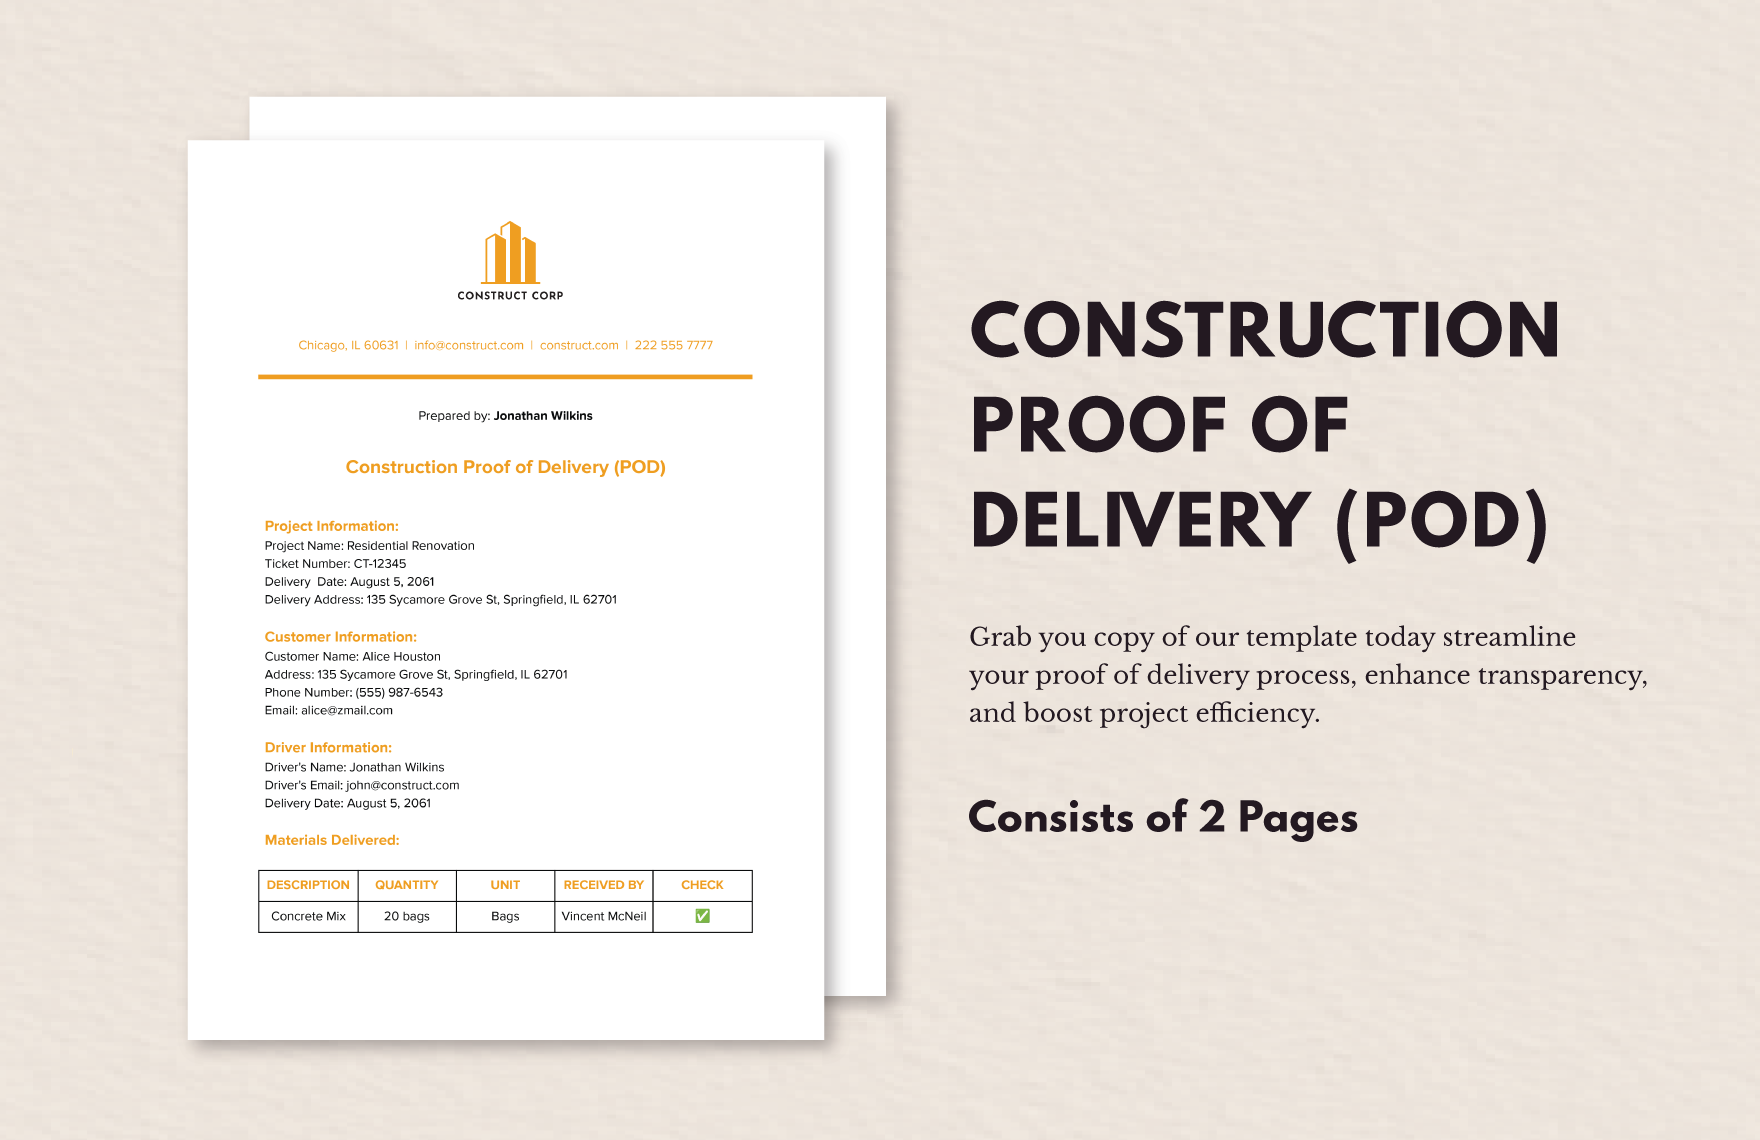 Construction Proof of Delivery (POD) 